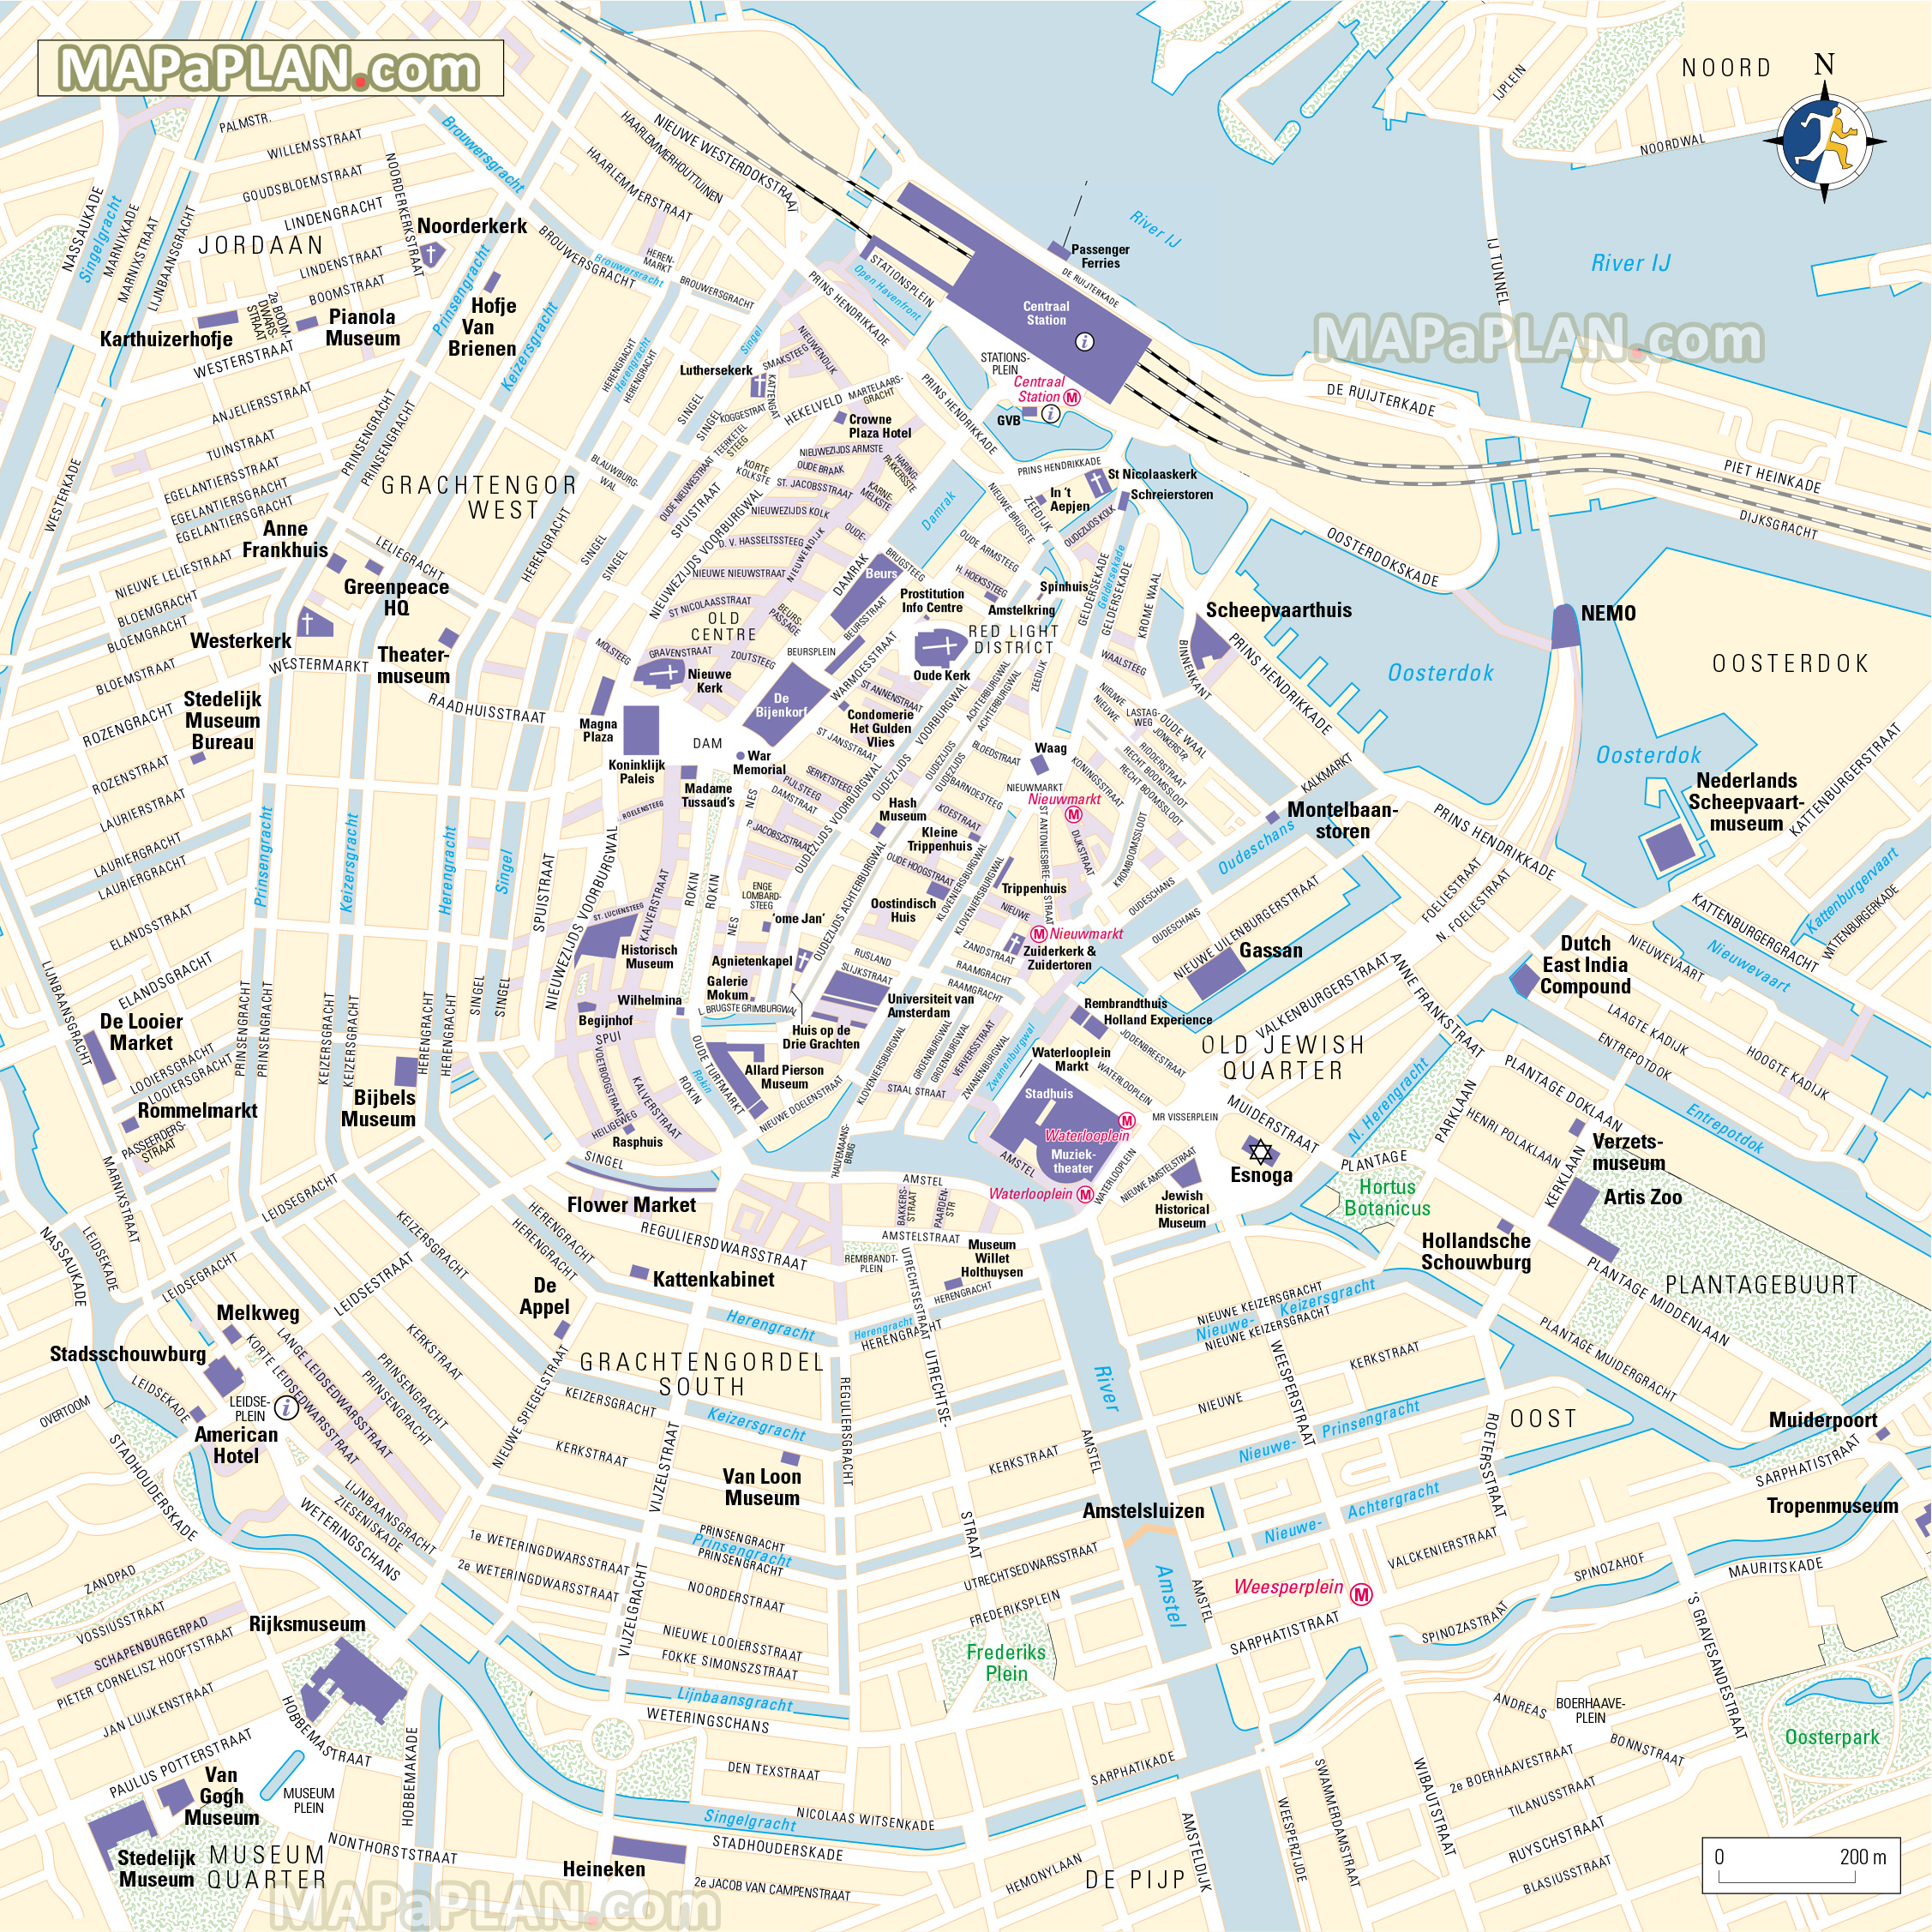 Centrum Where to go what to see major historic points of interest Amsterdam top tourist attractions map